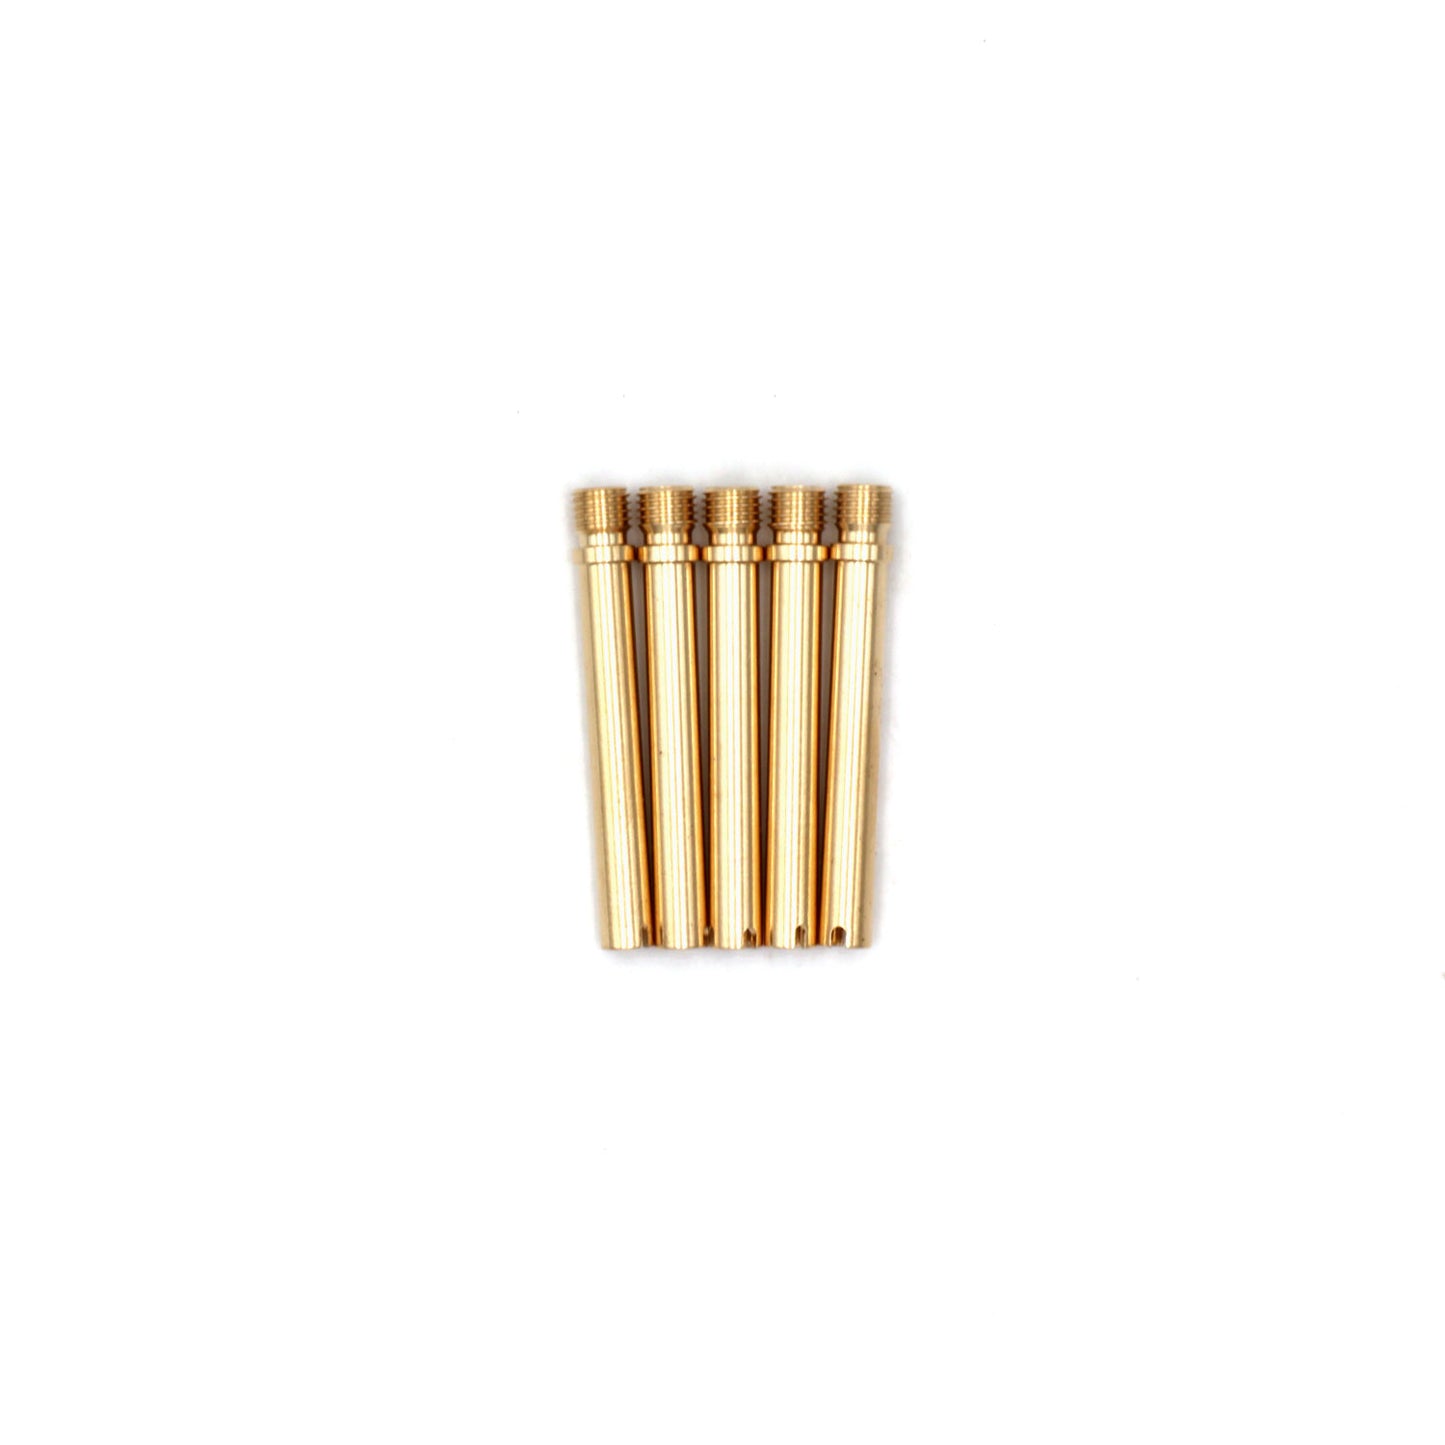 FY-XF200C Plasma Cutting Torch Consumables